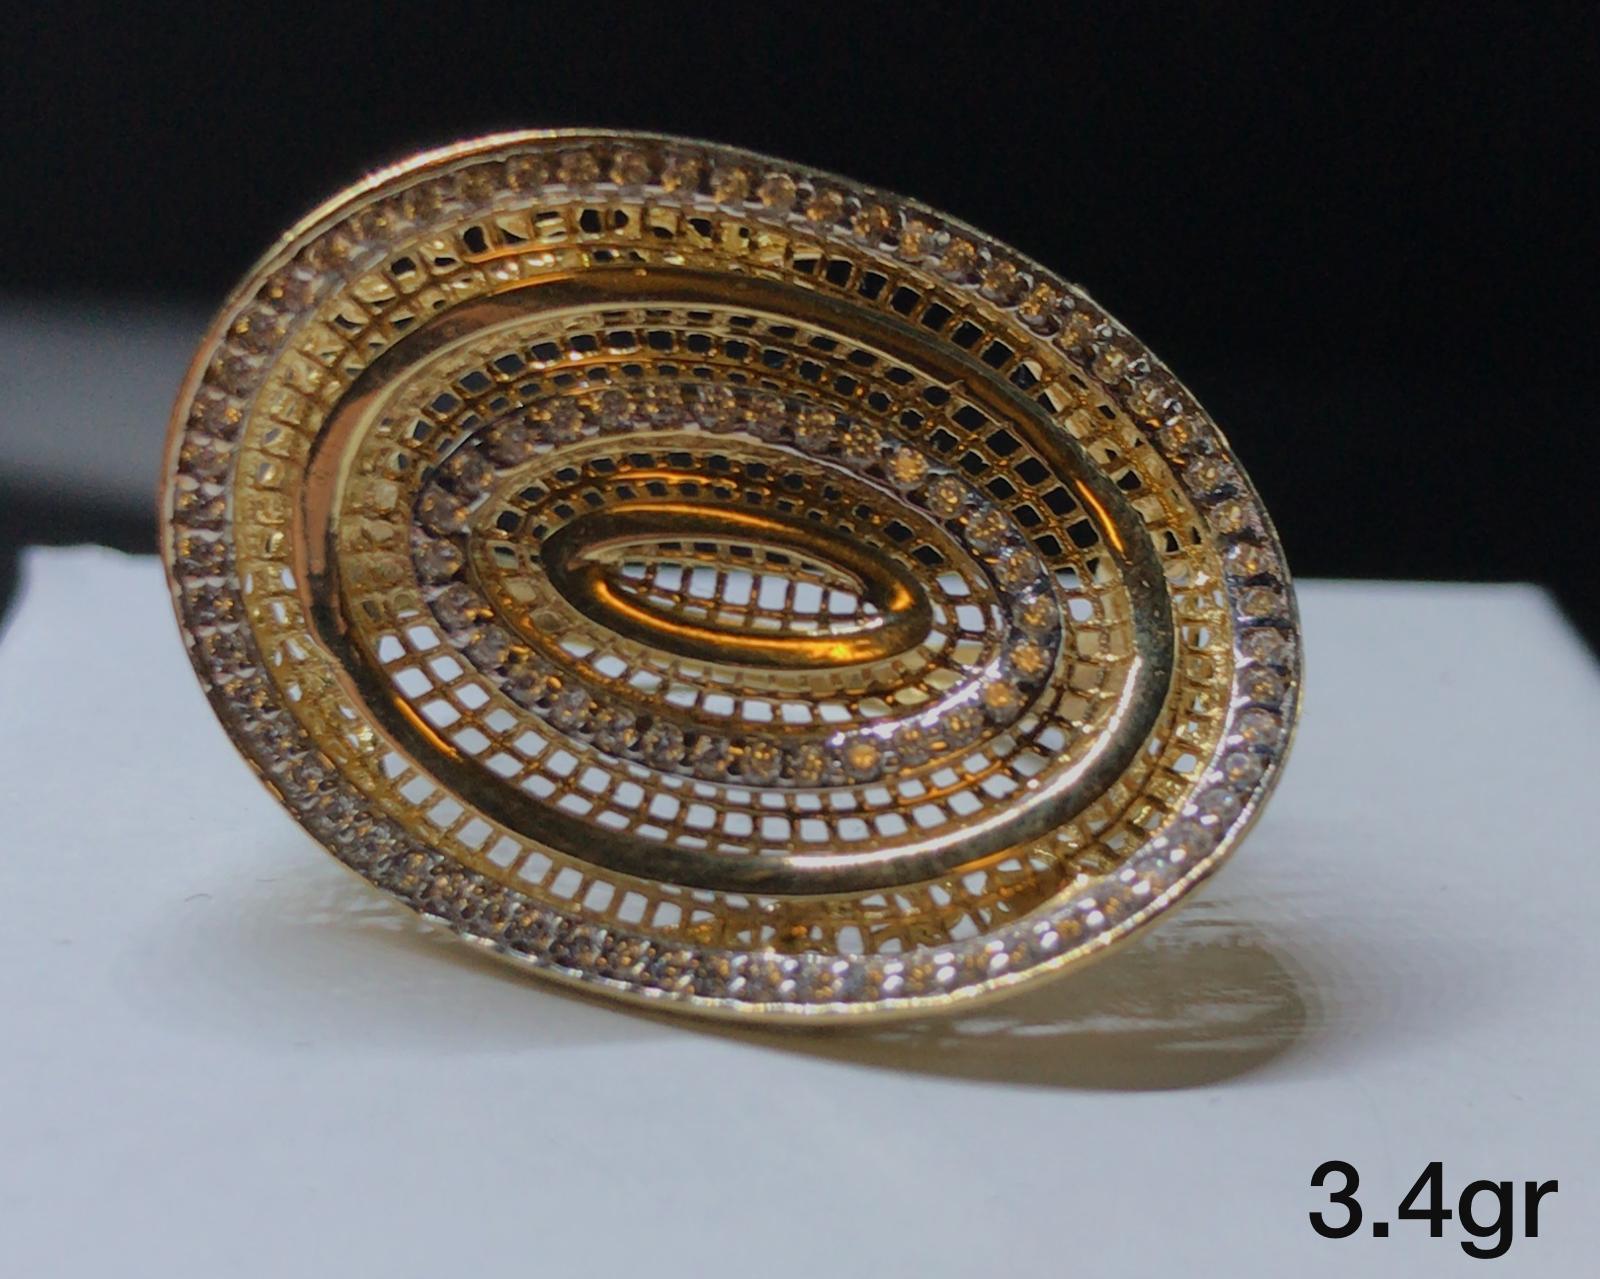 10K Gold Oval Ring